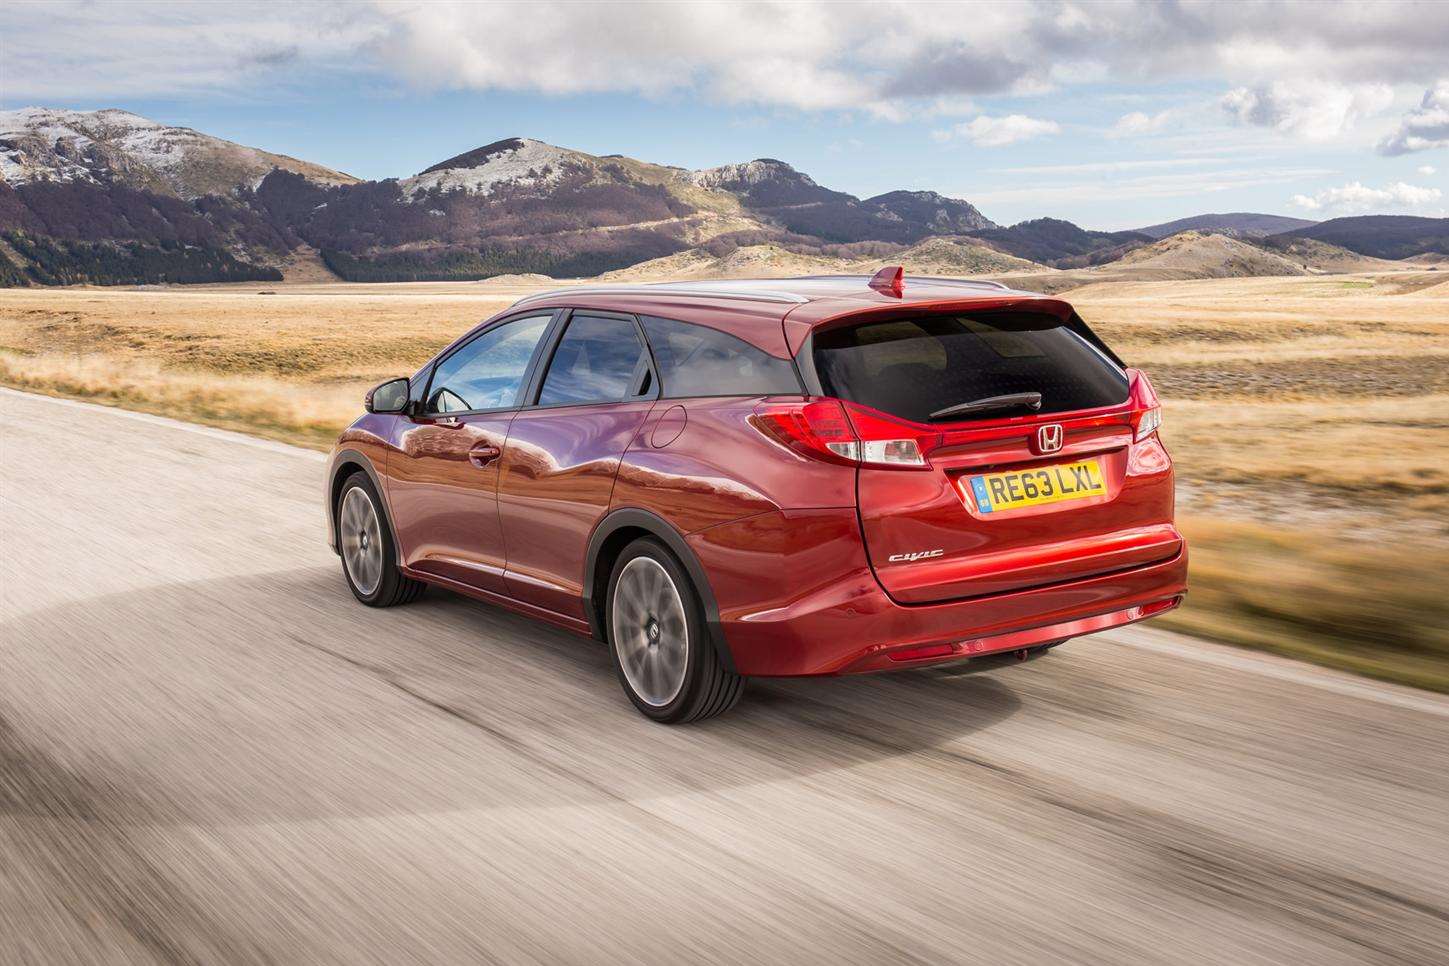 The Honda Civic Tourer has the largest boot in its class